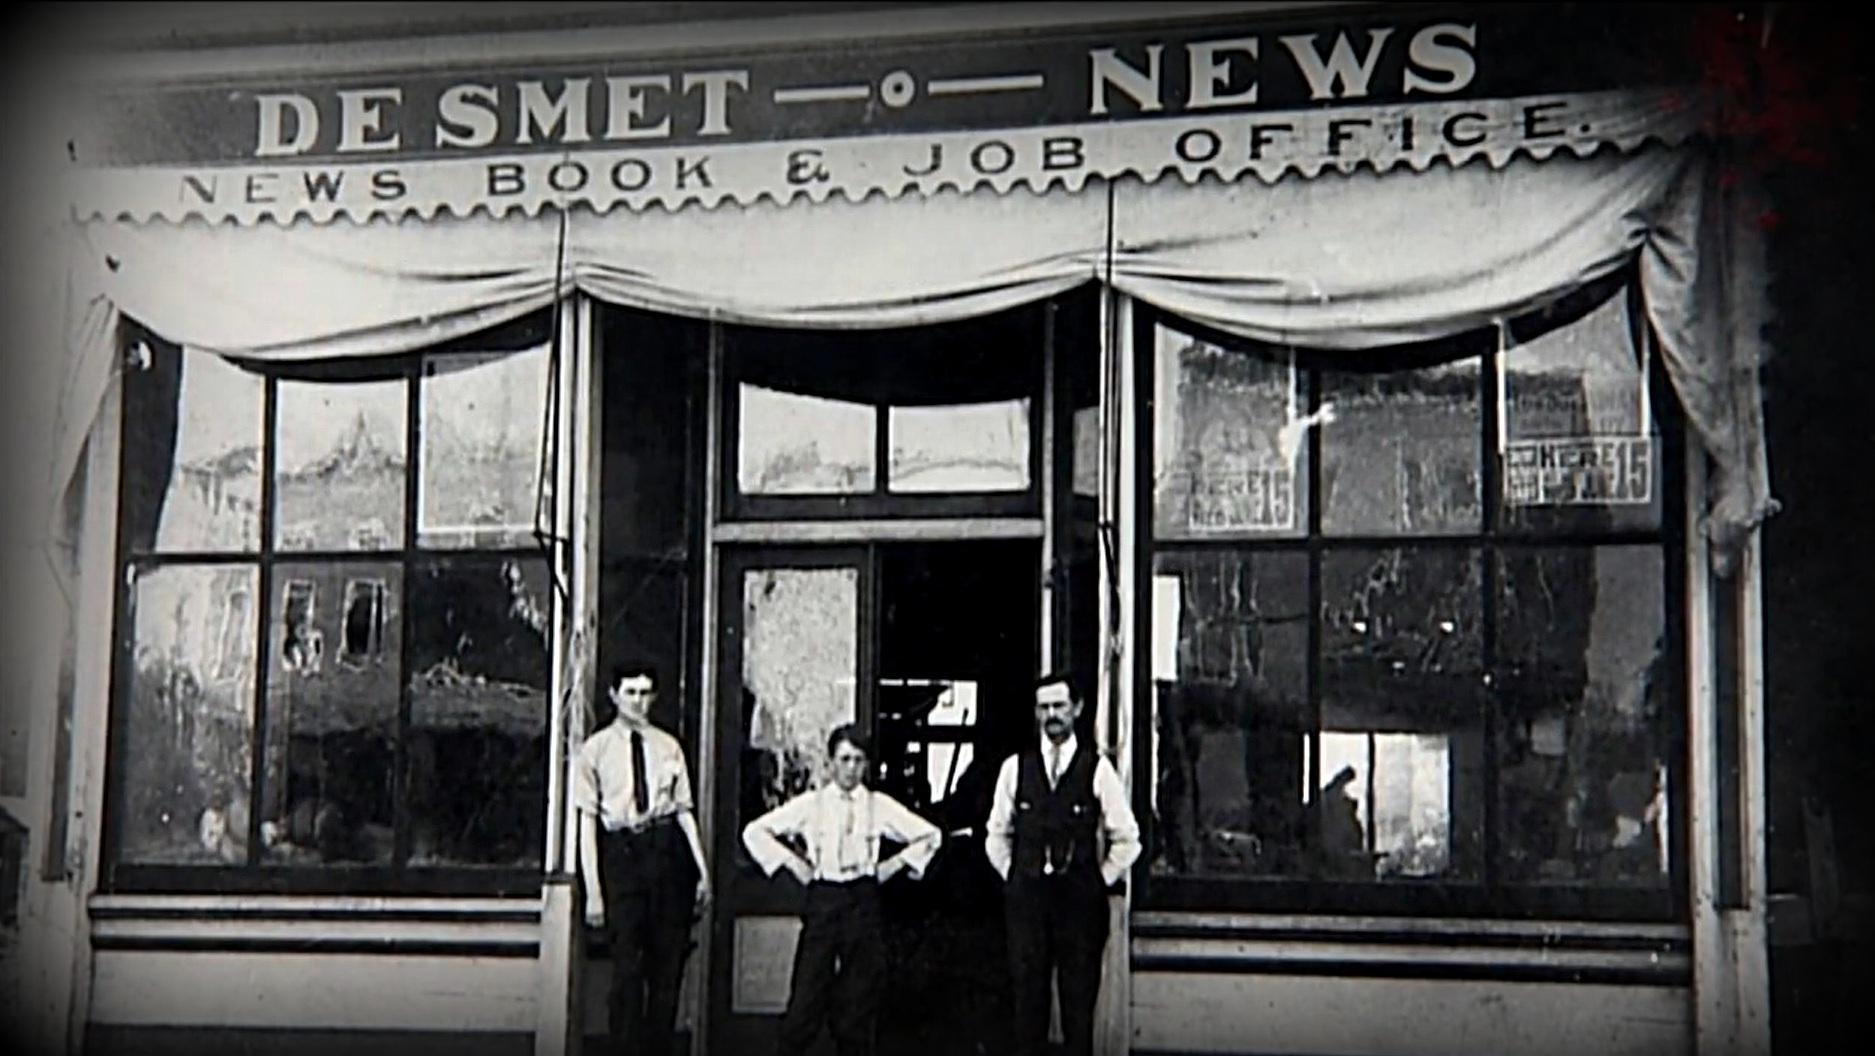  Archival photo of three men standing in front of the De Smet News building.